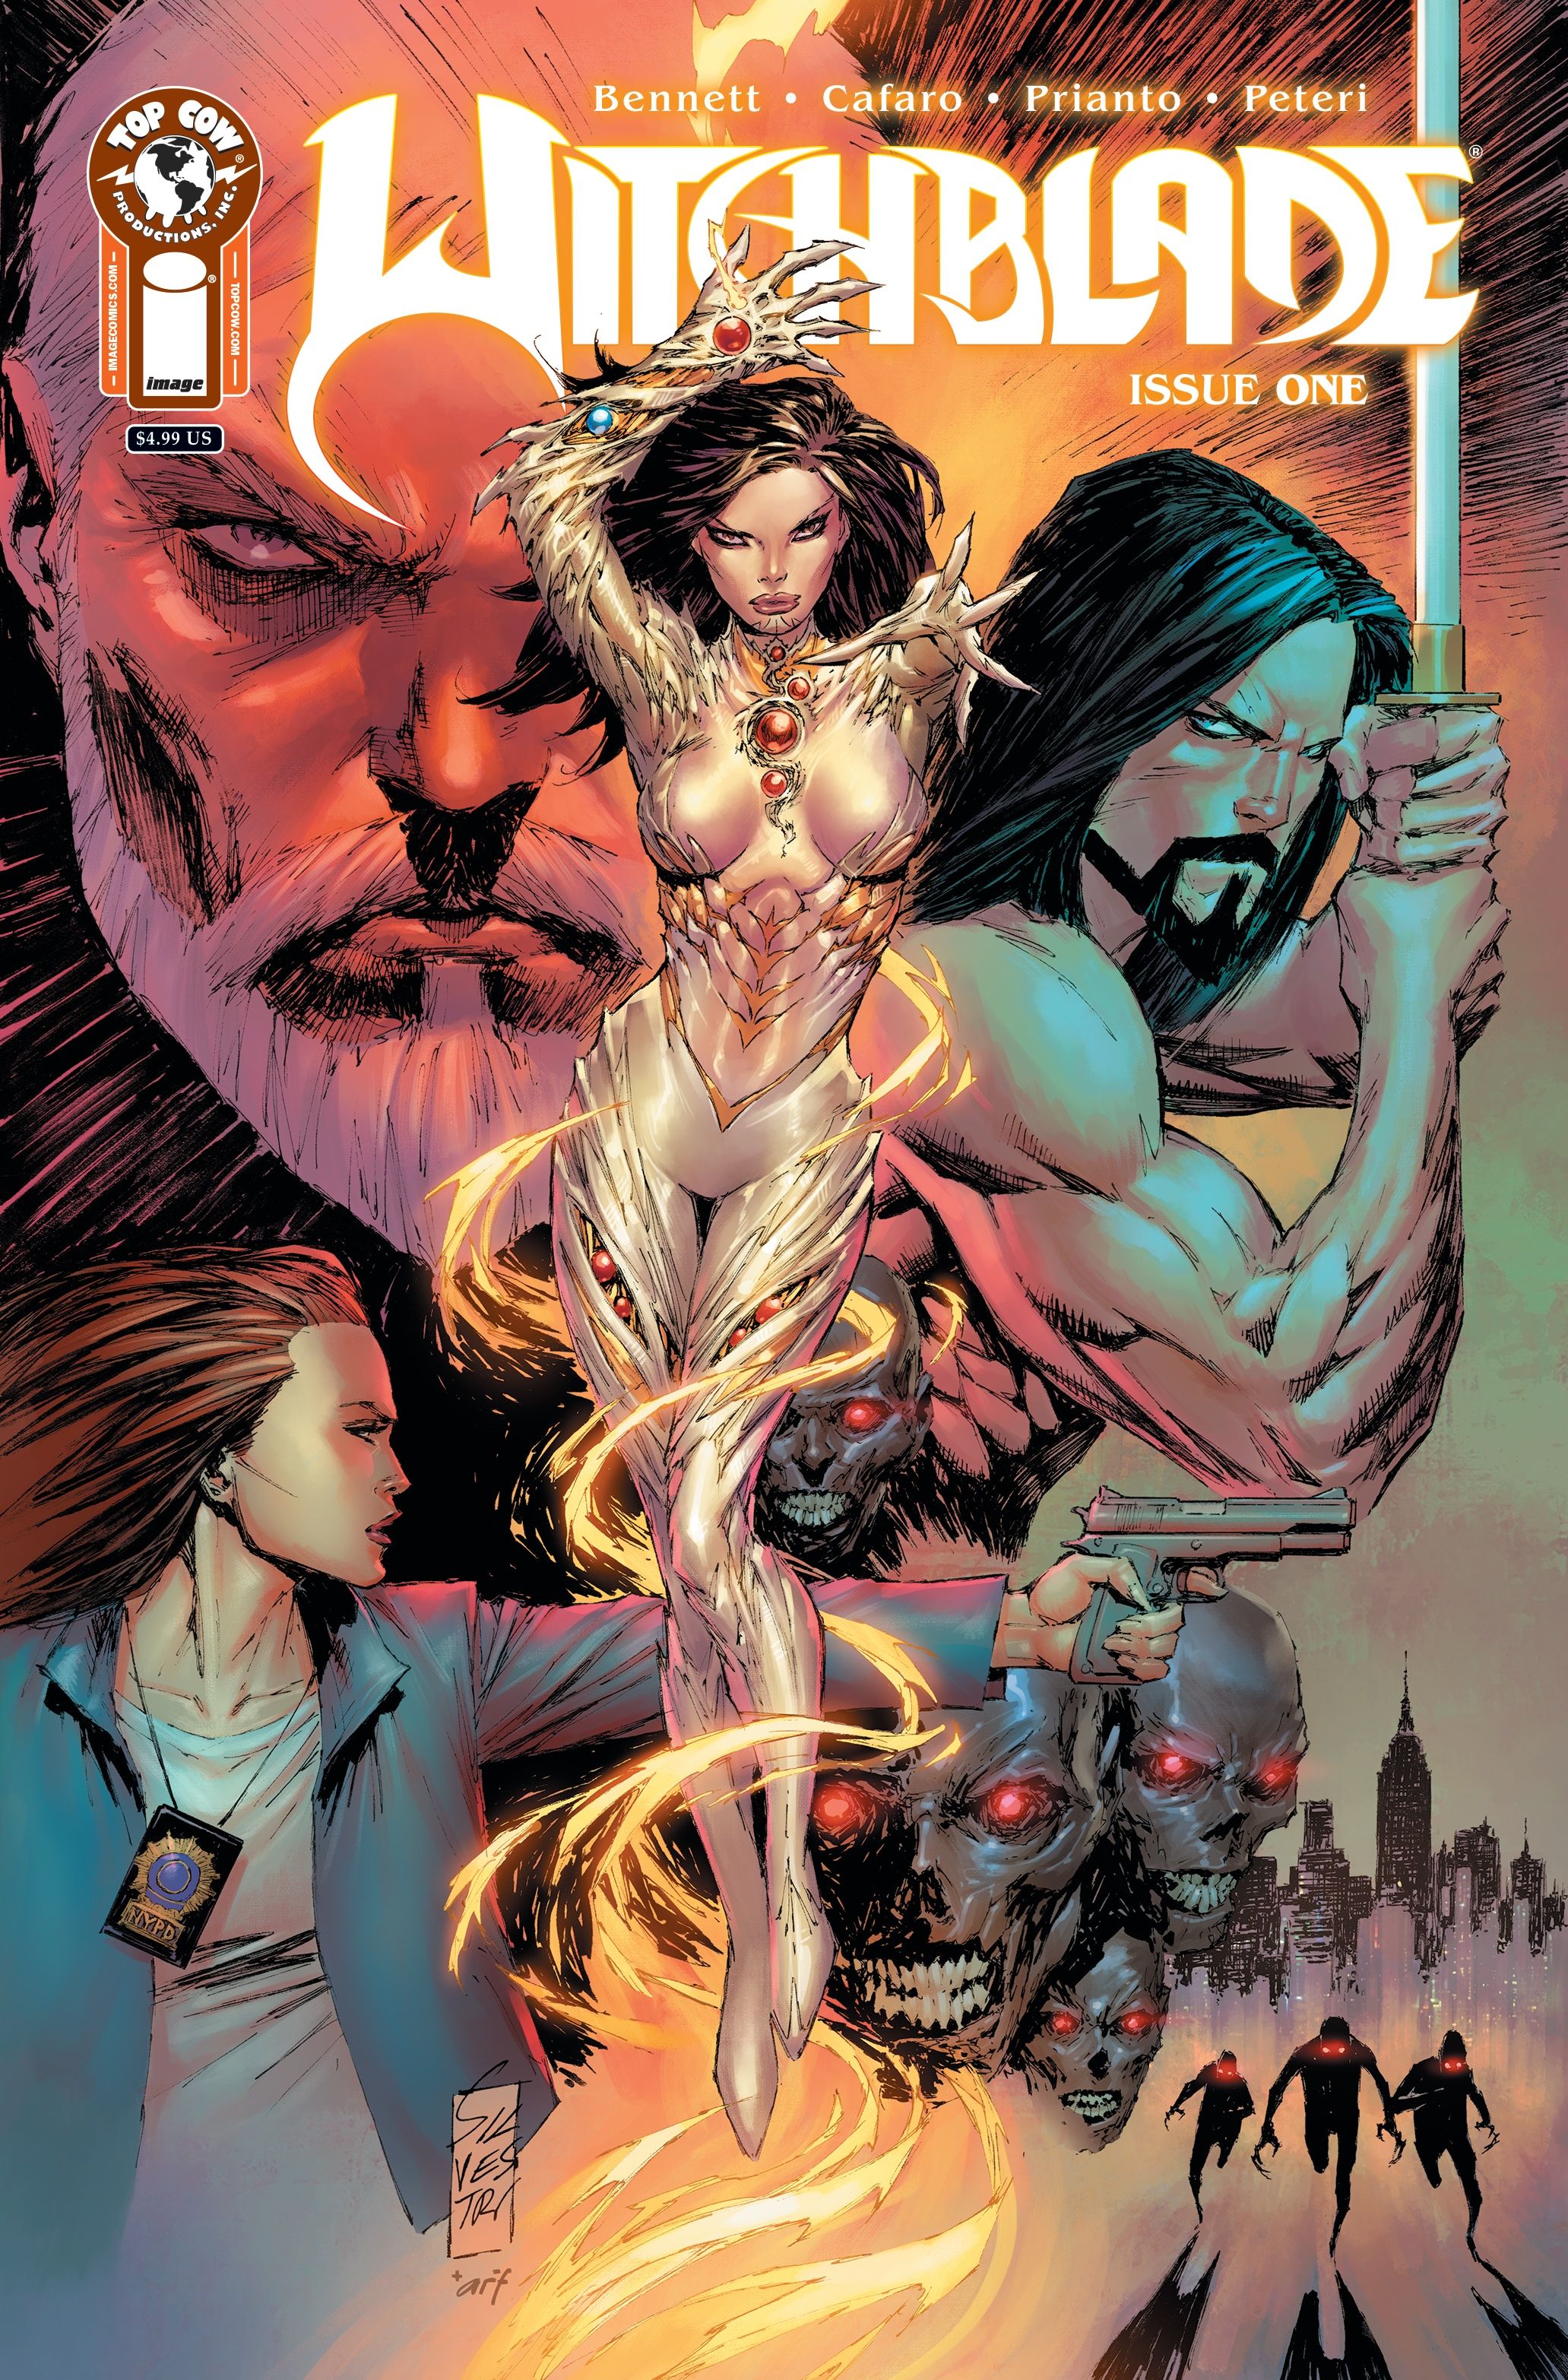 Witchblade 1 Main Cover: Witchblade sci-fi characters in a movie poster-style posed cover.